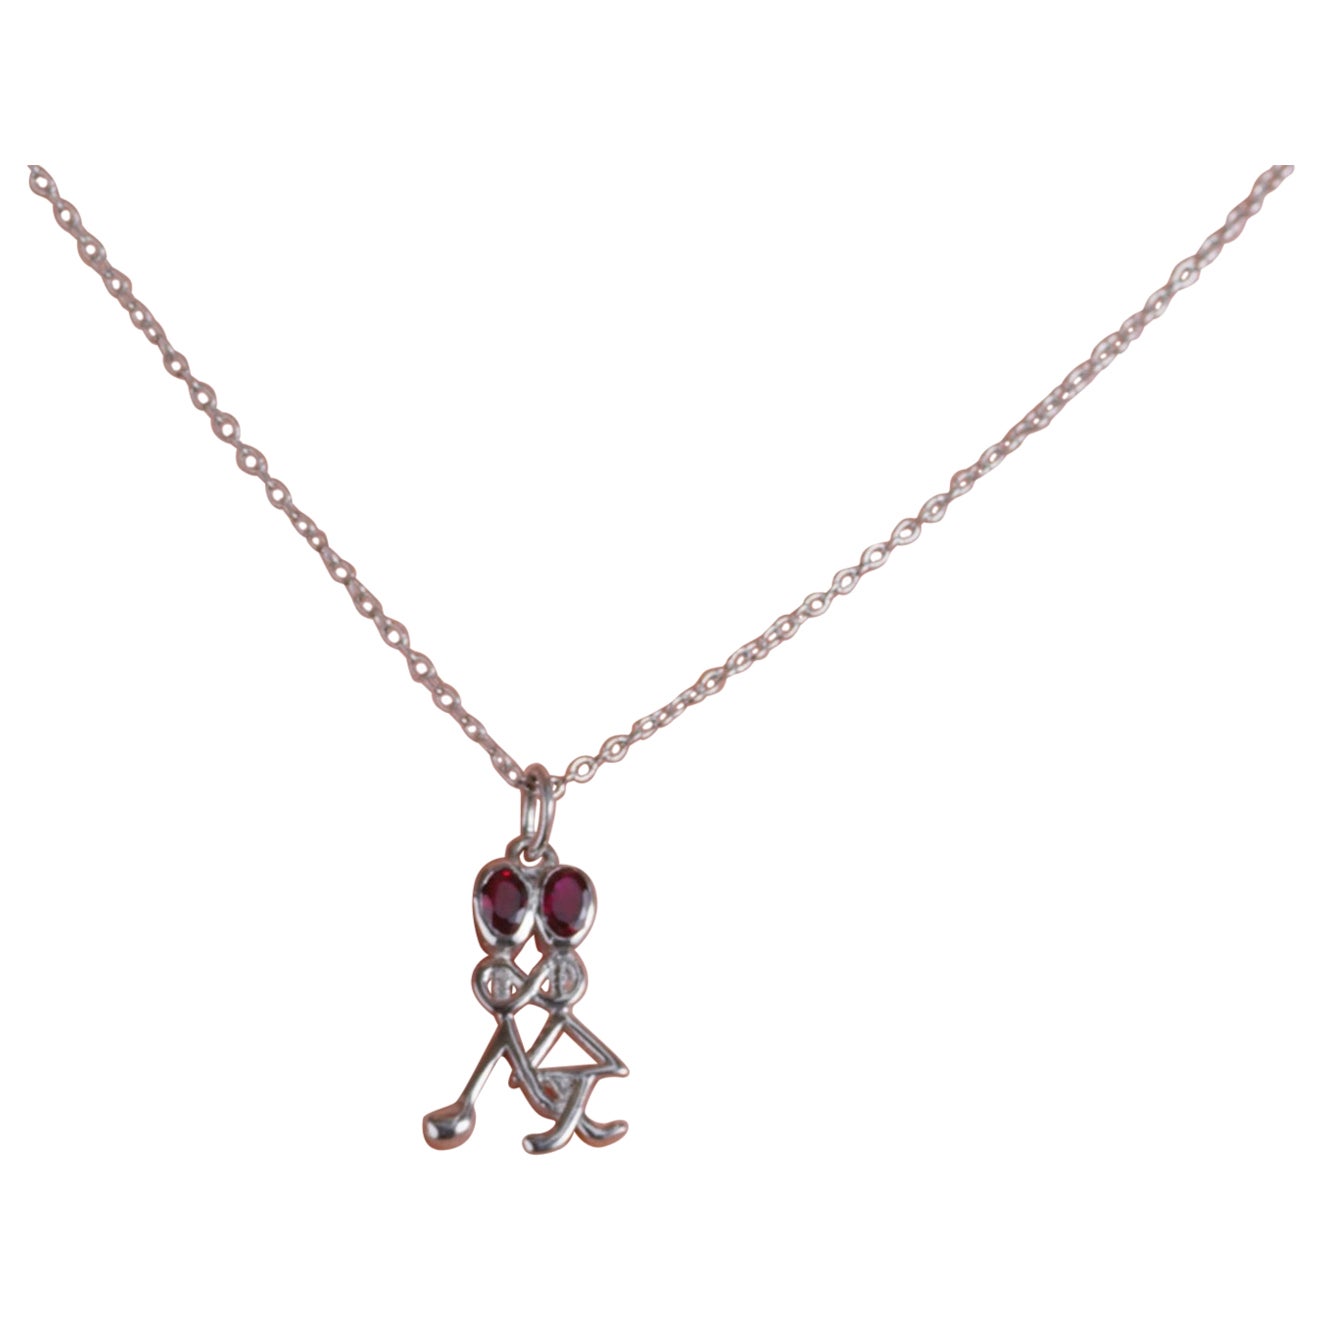 0.24 Carat Total Weight Ruby Sterling Silver Stick Figure Pendant Necklace